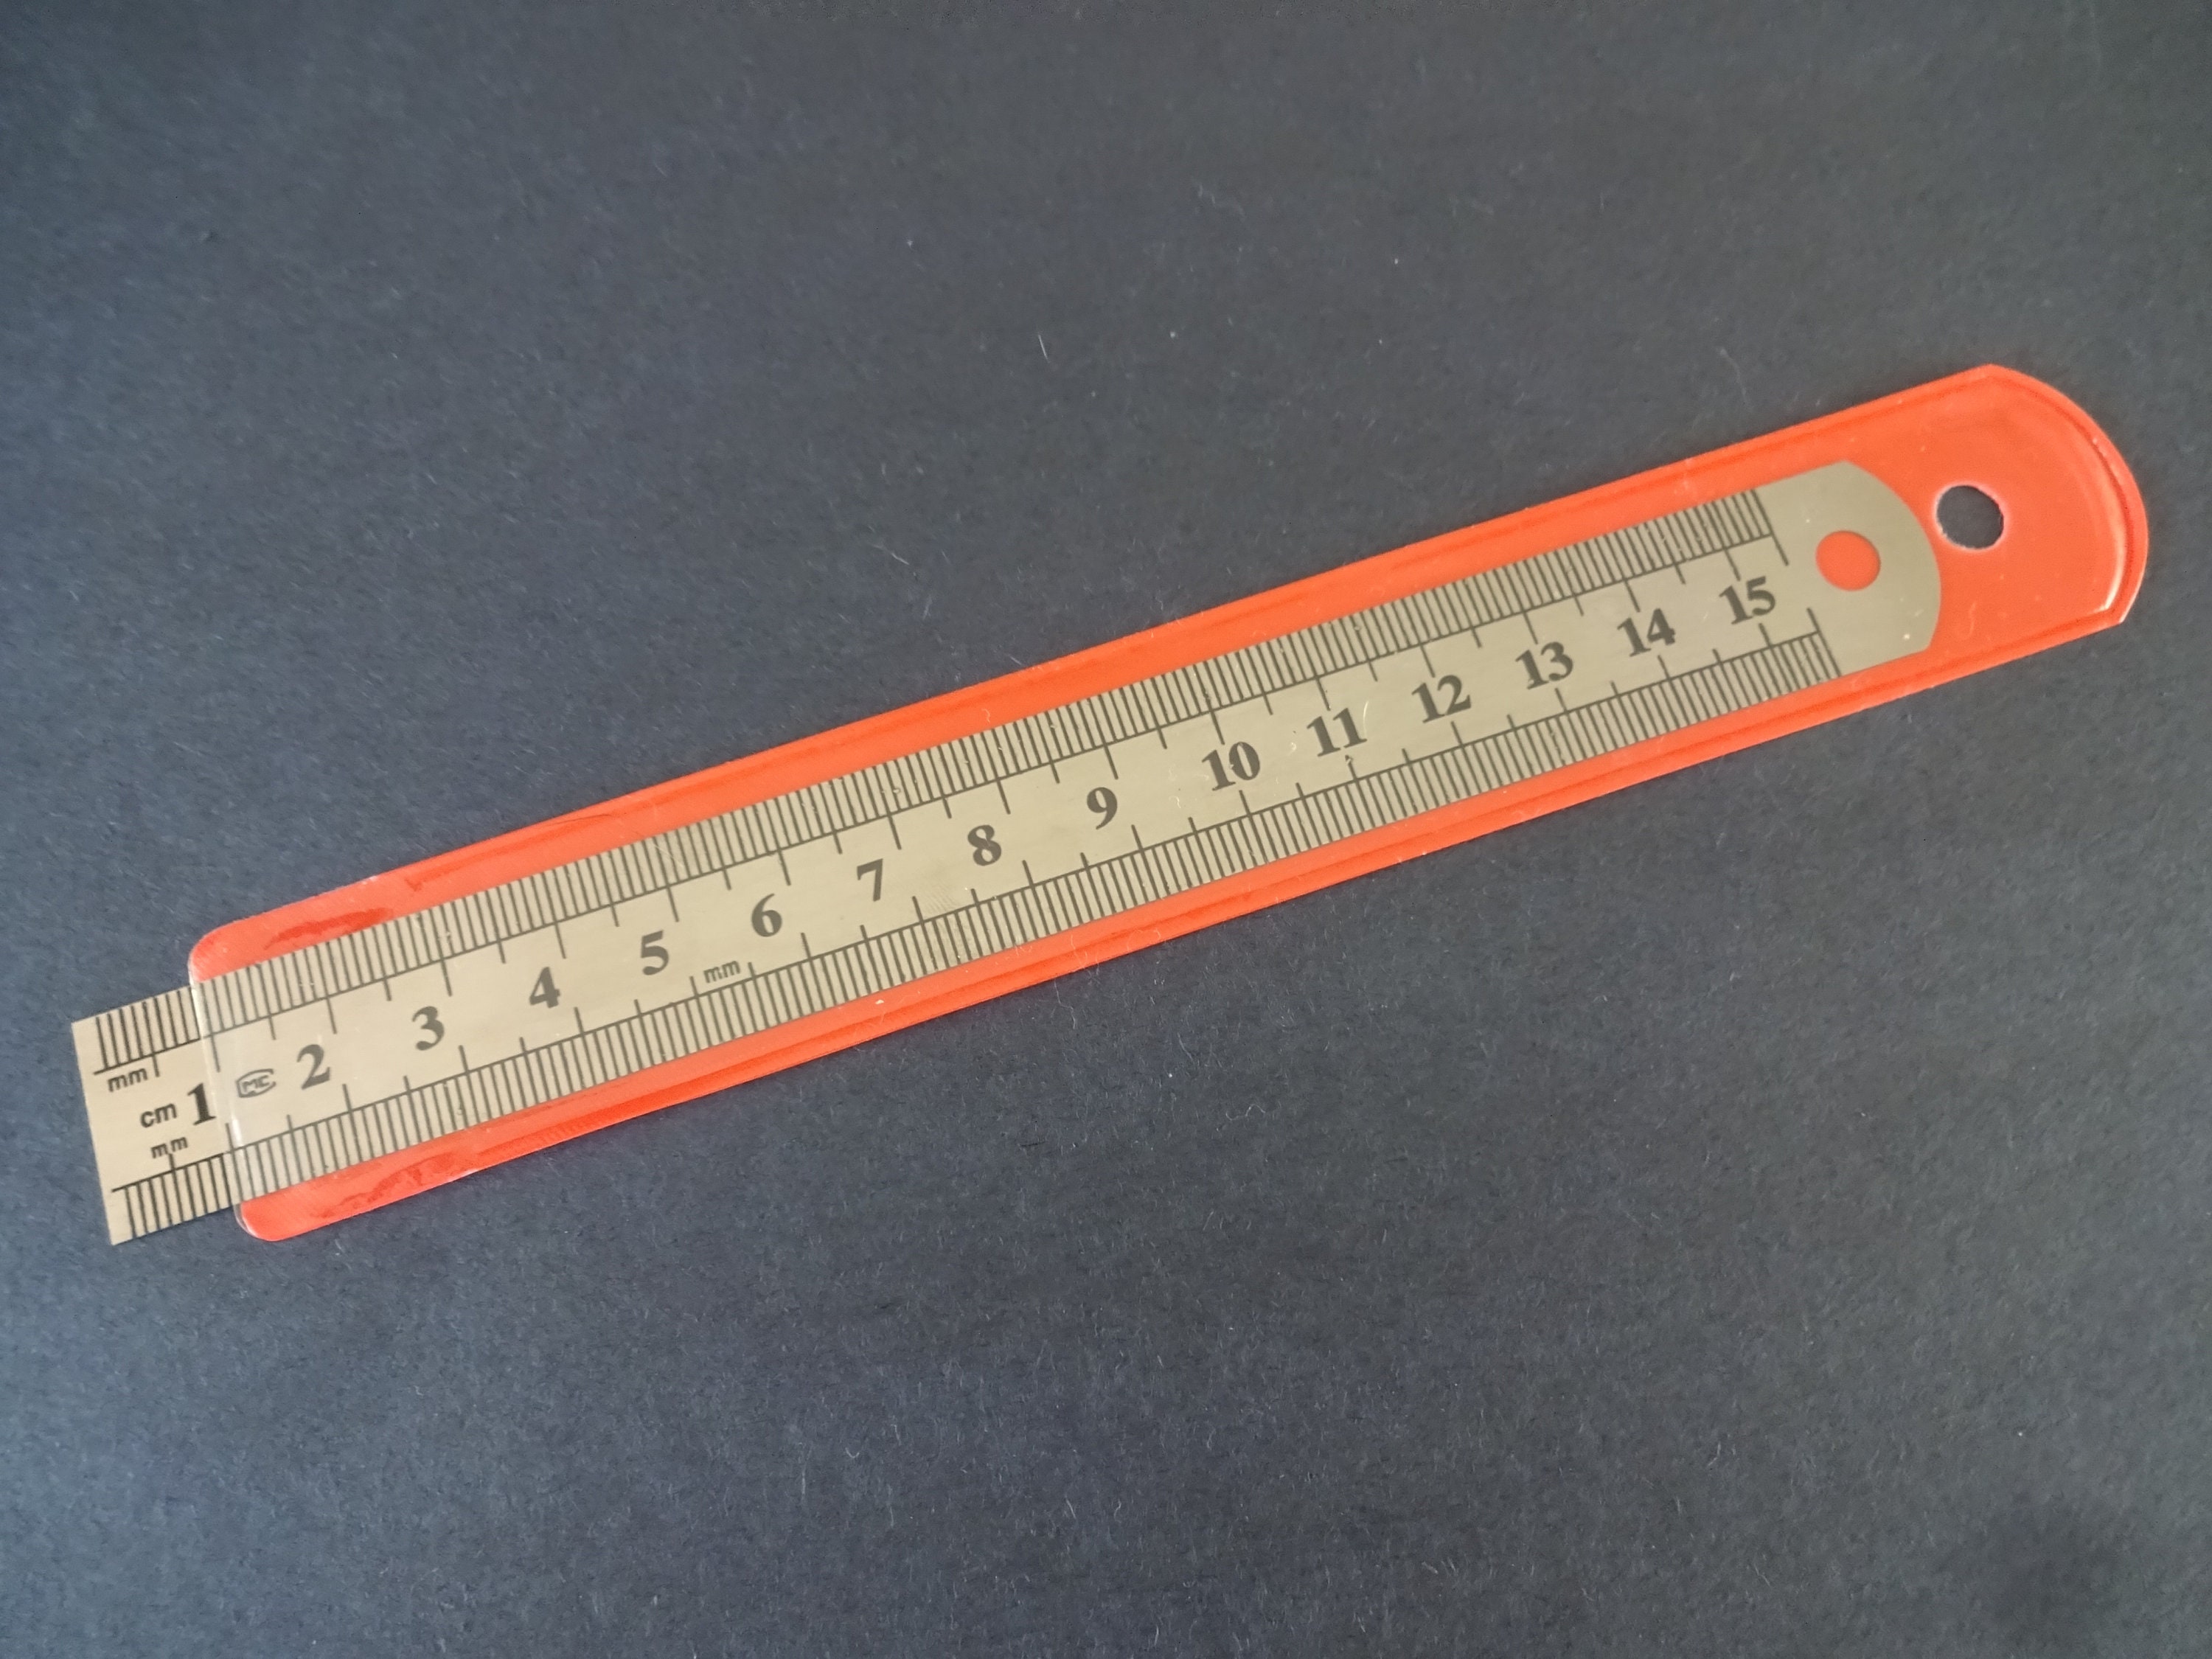 Stainless Steel Metric Ruler, 15/20/30cm Metric Rule, Jewelry Precision  Ruler, Double Sided, Measures Inches, Centimeters & Millimeters -   Denmark